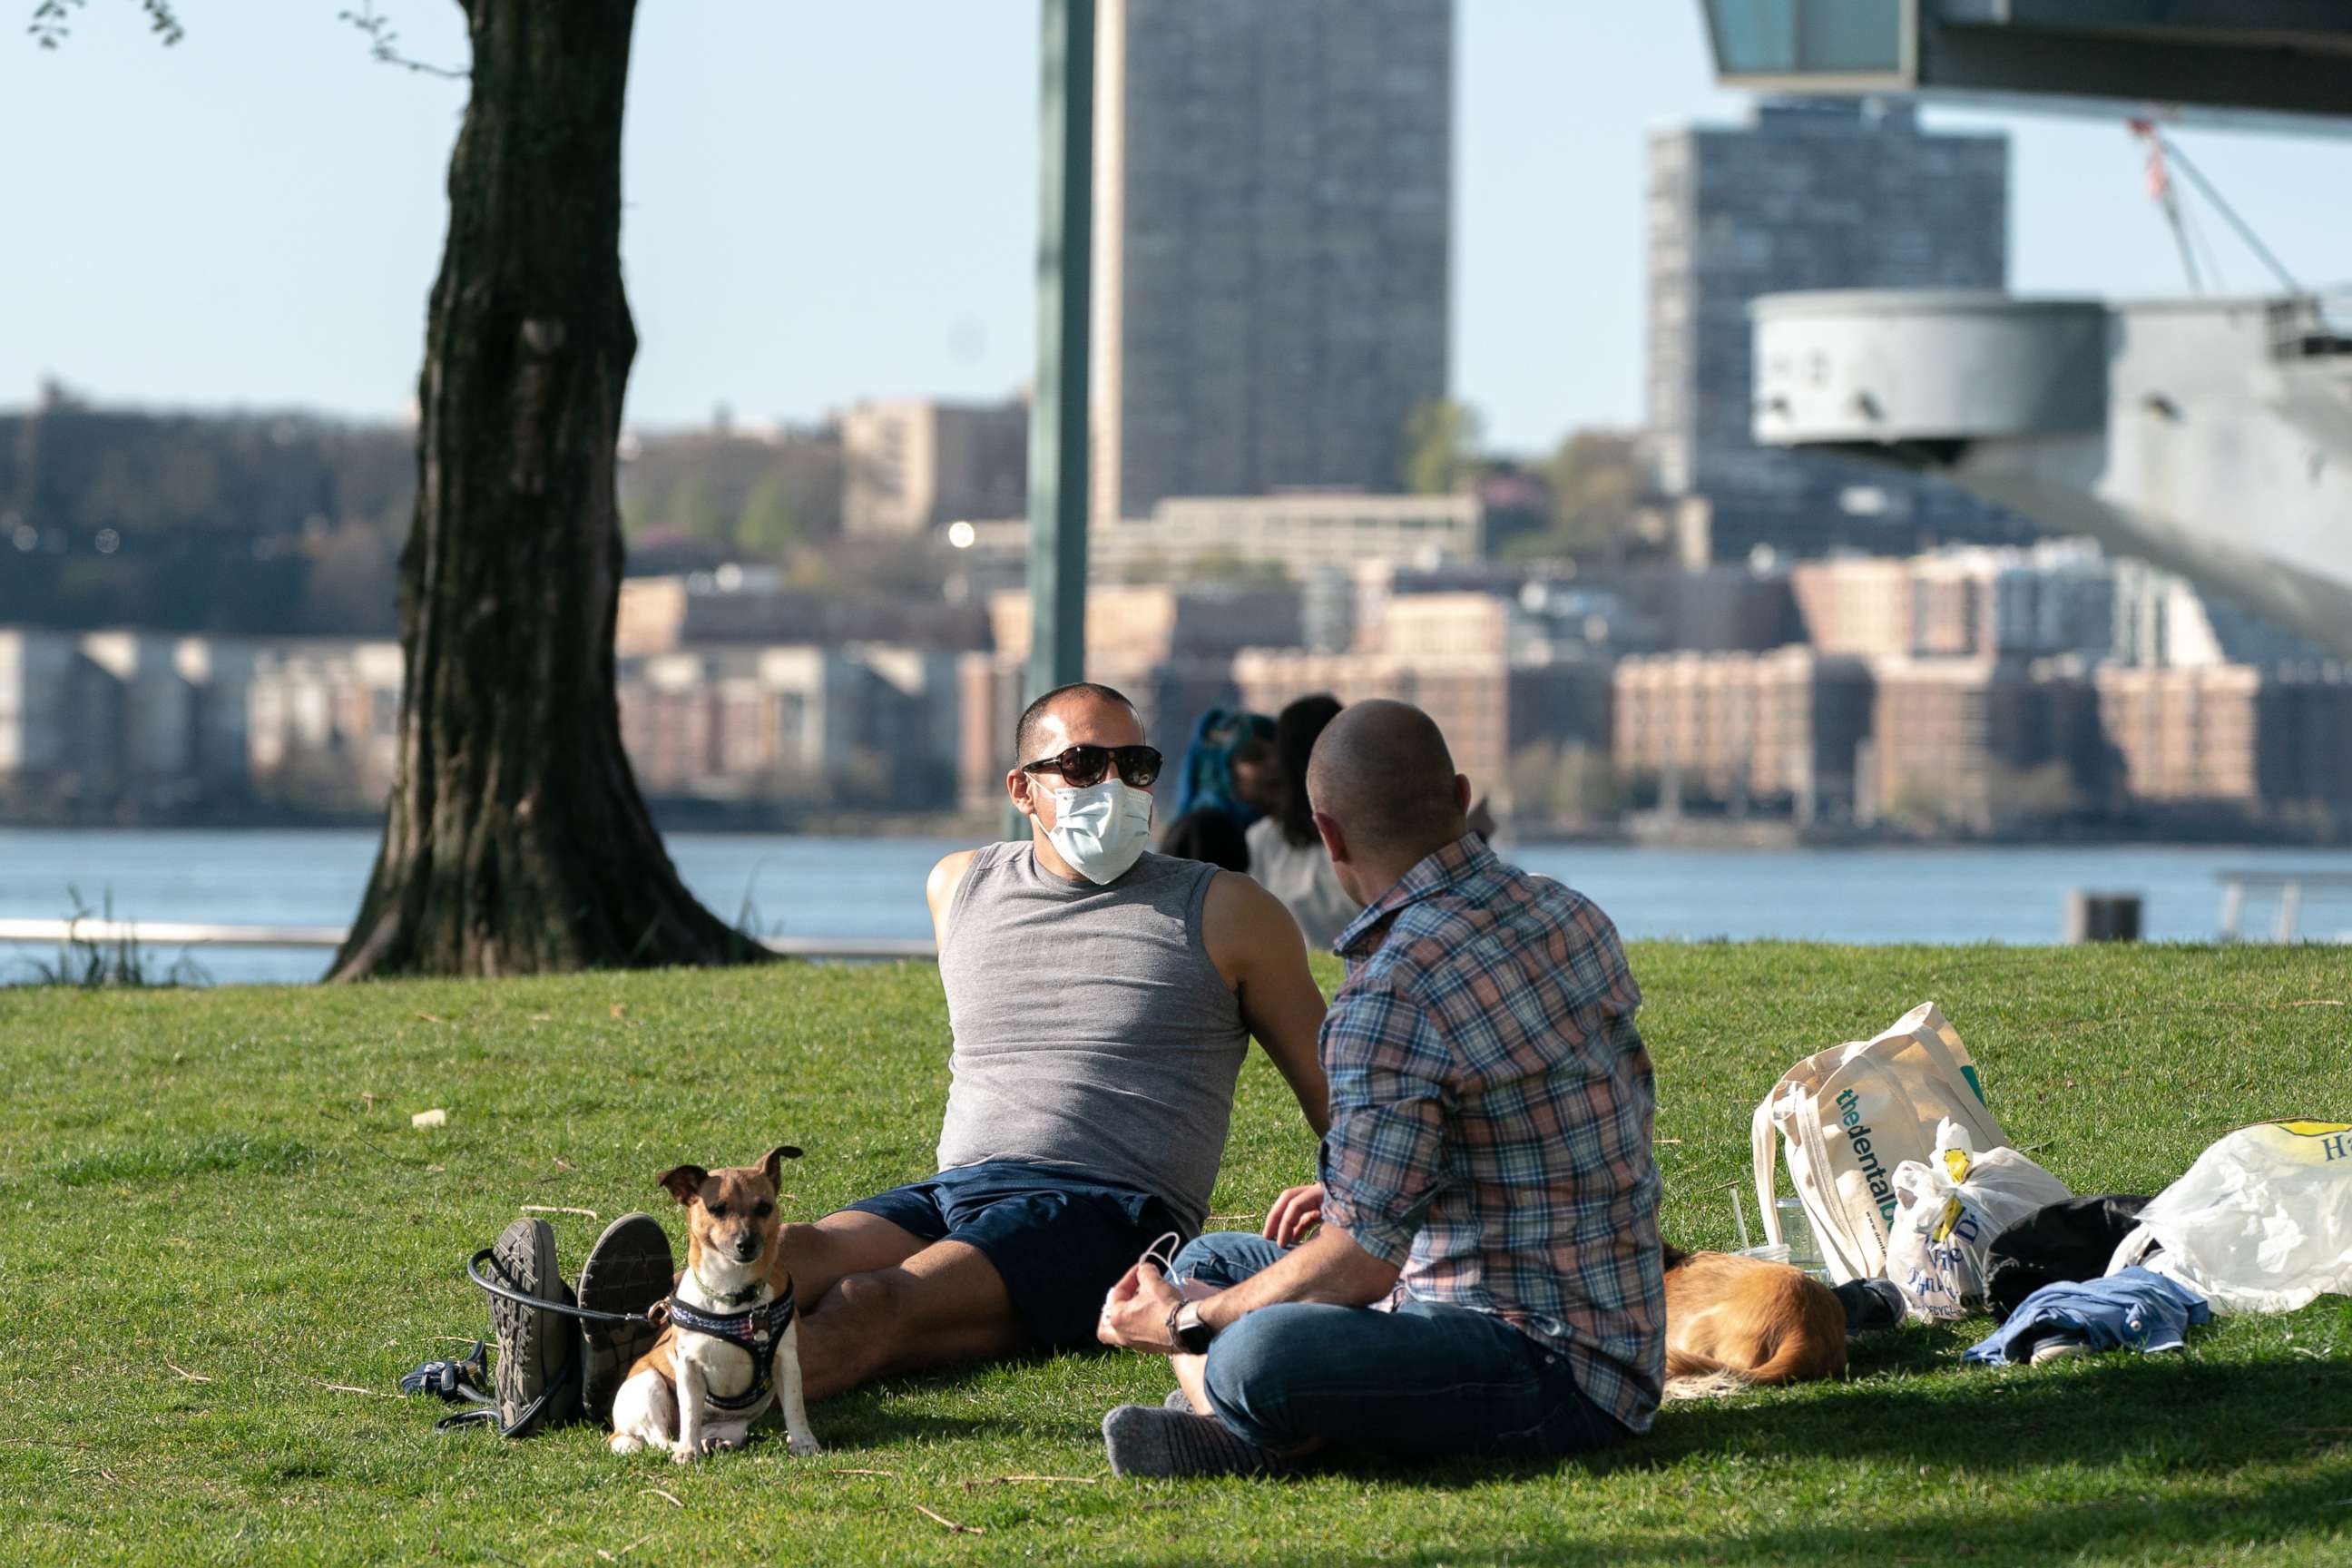 PHOTO: A man wearing a protective mask enjoys the weather near Hudson River Park, April 28, 2020, in New York City.